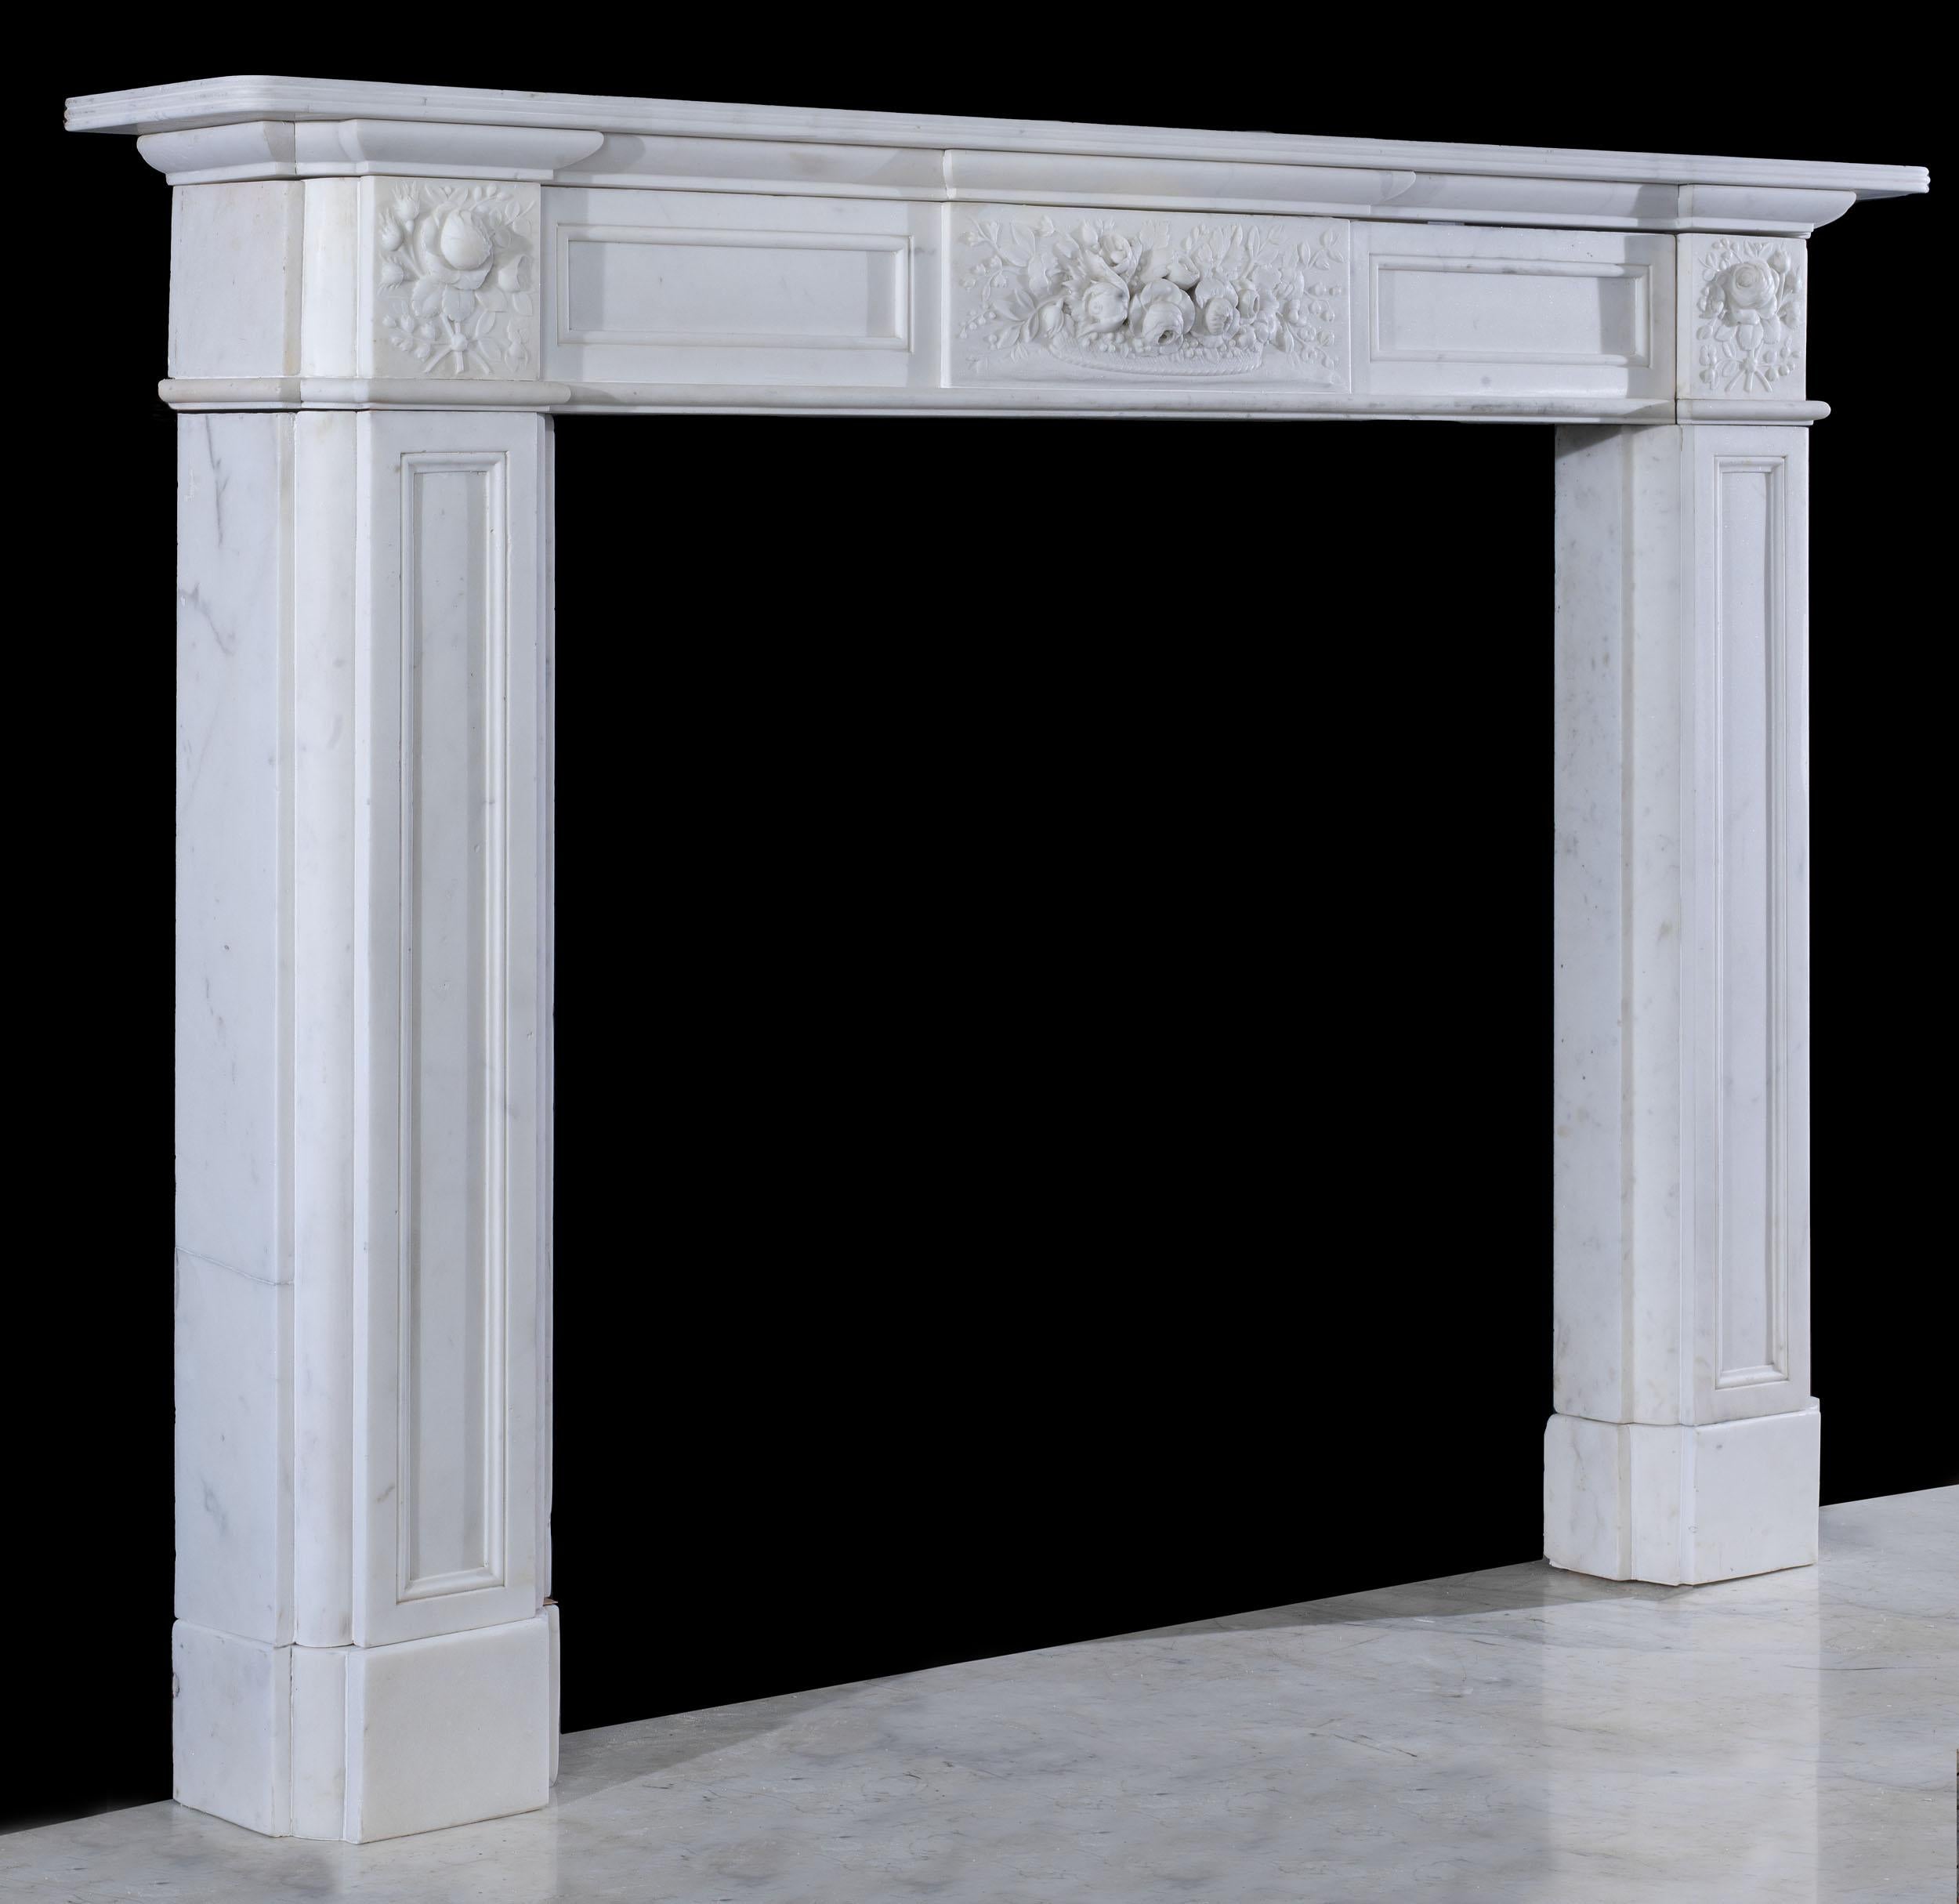 A beautifully carved early Victorian fireplace in pure white statuary marble. The plain shelf sits above a panelled frieze which is centred by a delicately carved tablet which is profusely carved with a basket of flowers in high relief. This is